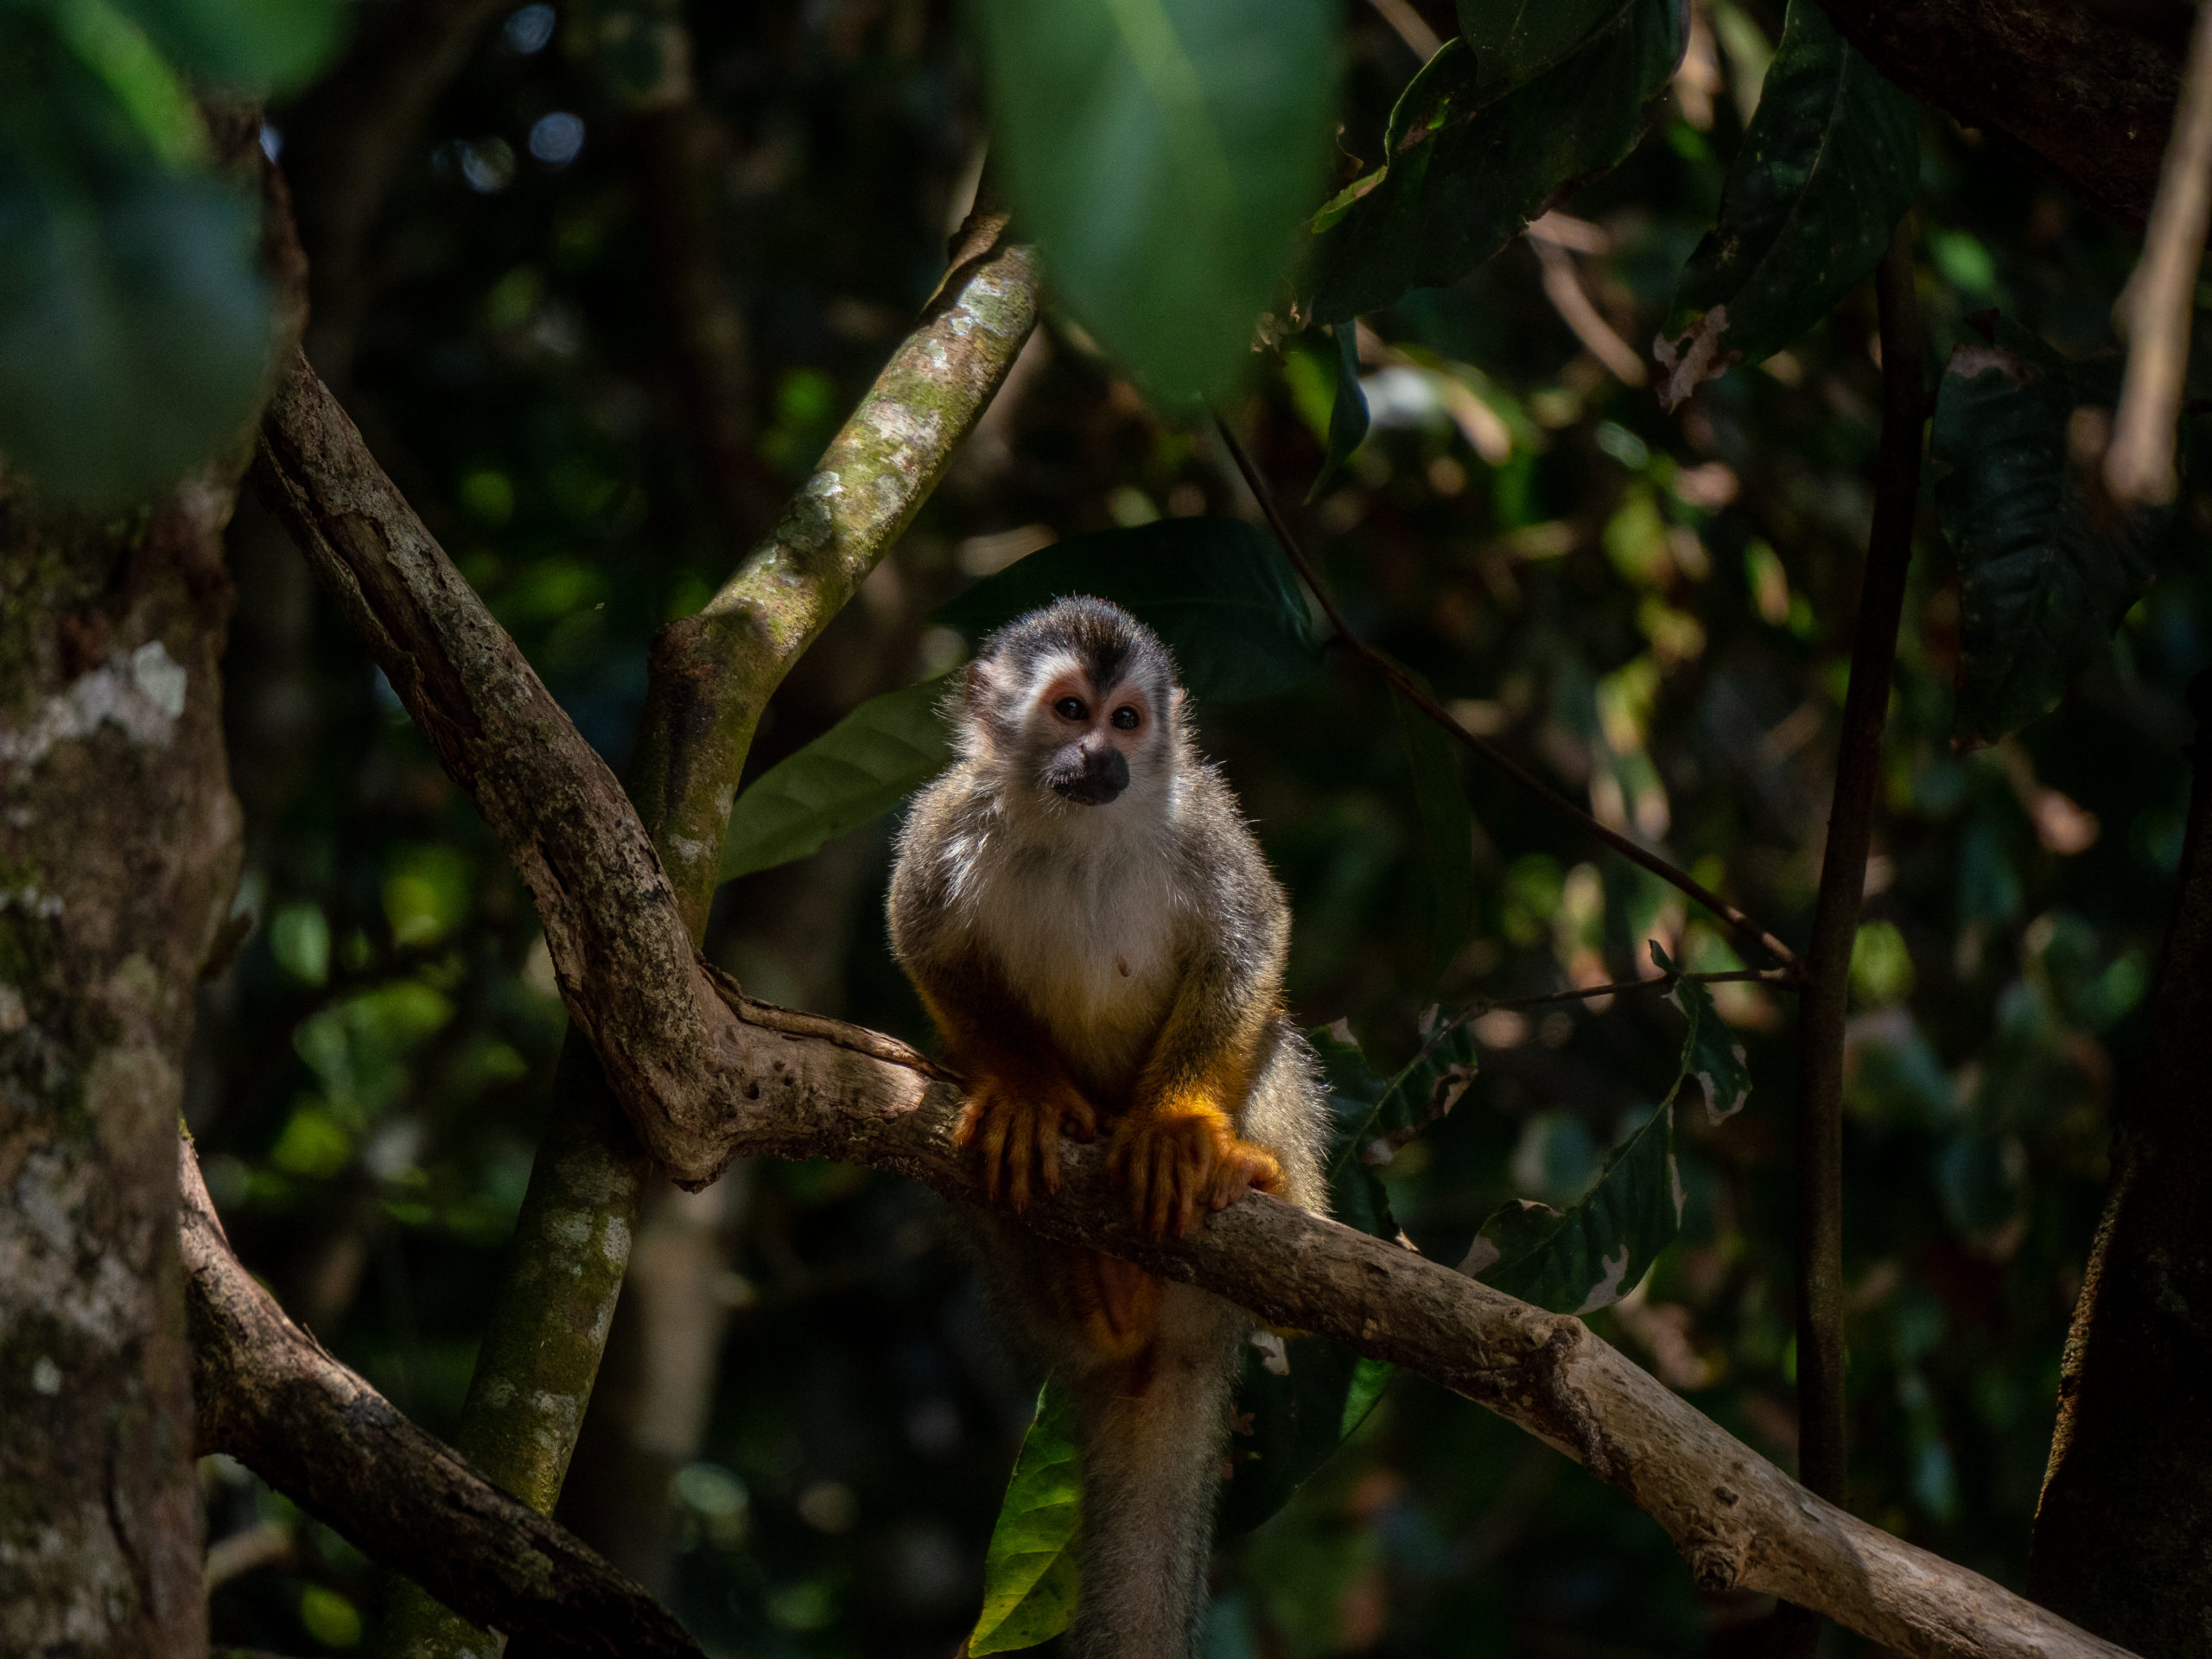 A squirrel monkey sits on a large branch and looks towards the camera. A small ray of light shows the orange tints in his fur.